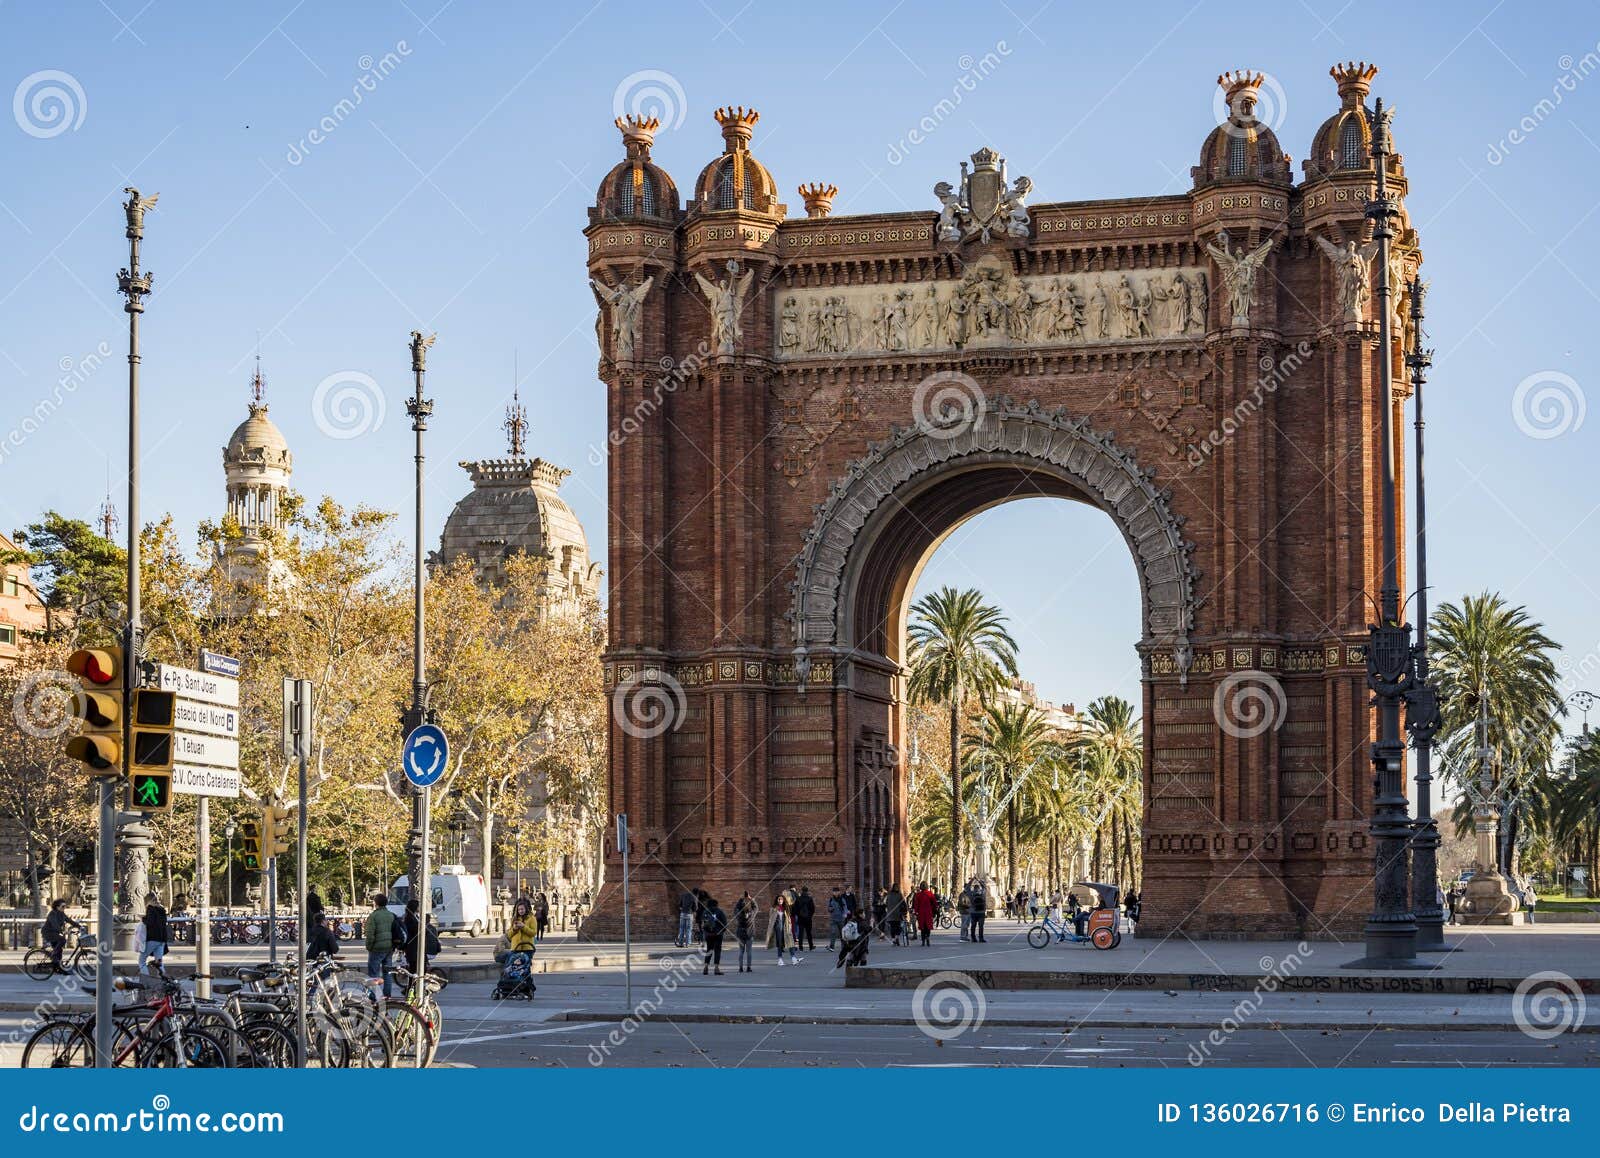 The Arc De Triomf One Of The Most Famous Landmark In